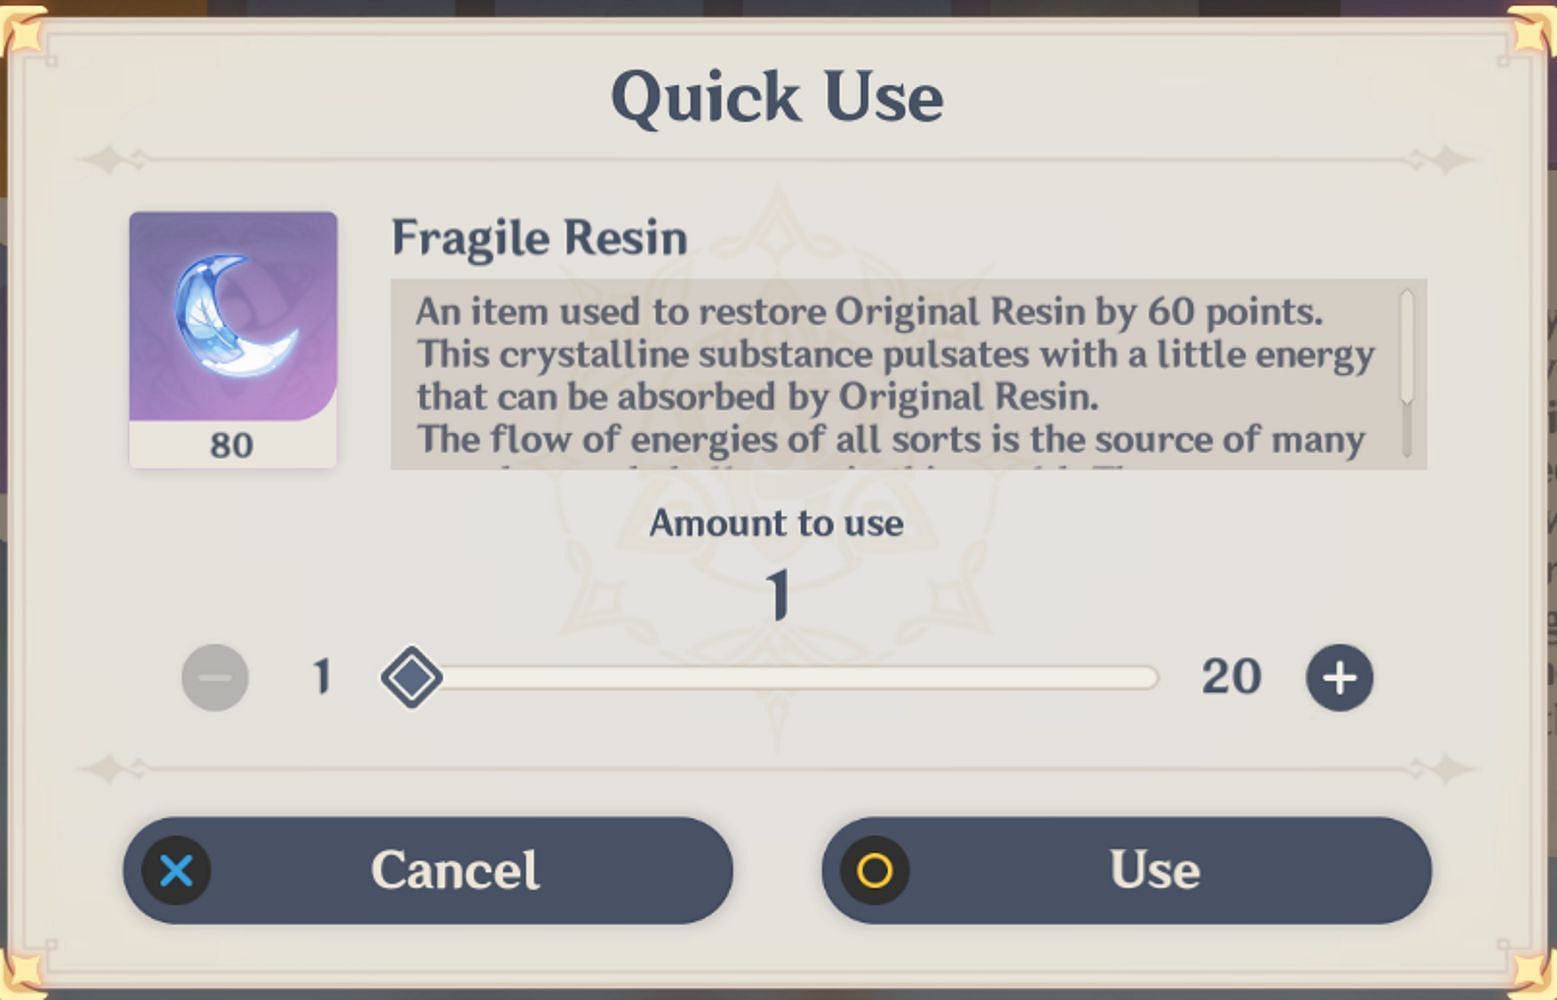 Players can use up to 20 Fragile Resin at a time (Image via Genshin Impact)